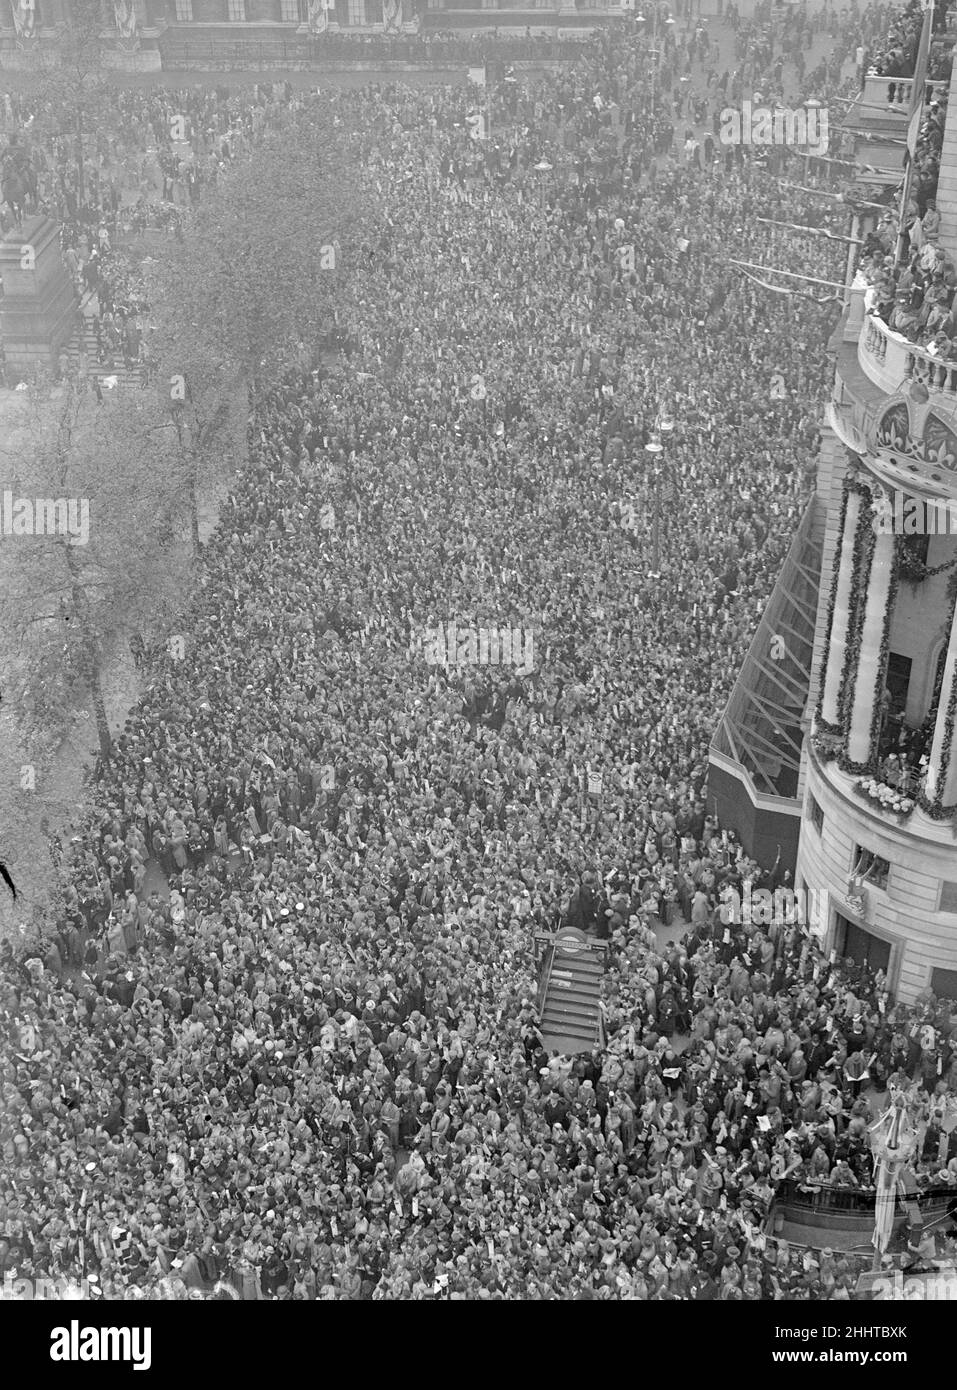 Coronation of King George VI.Part of the huge crowd gathered in Trafalgar Square awaiting  the arrival of golden state coach containing King George VI on its return to Buckingham Palace . 12th May 1937. Stock Photo